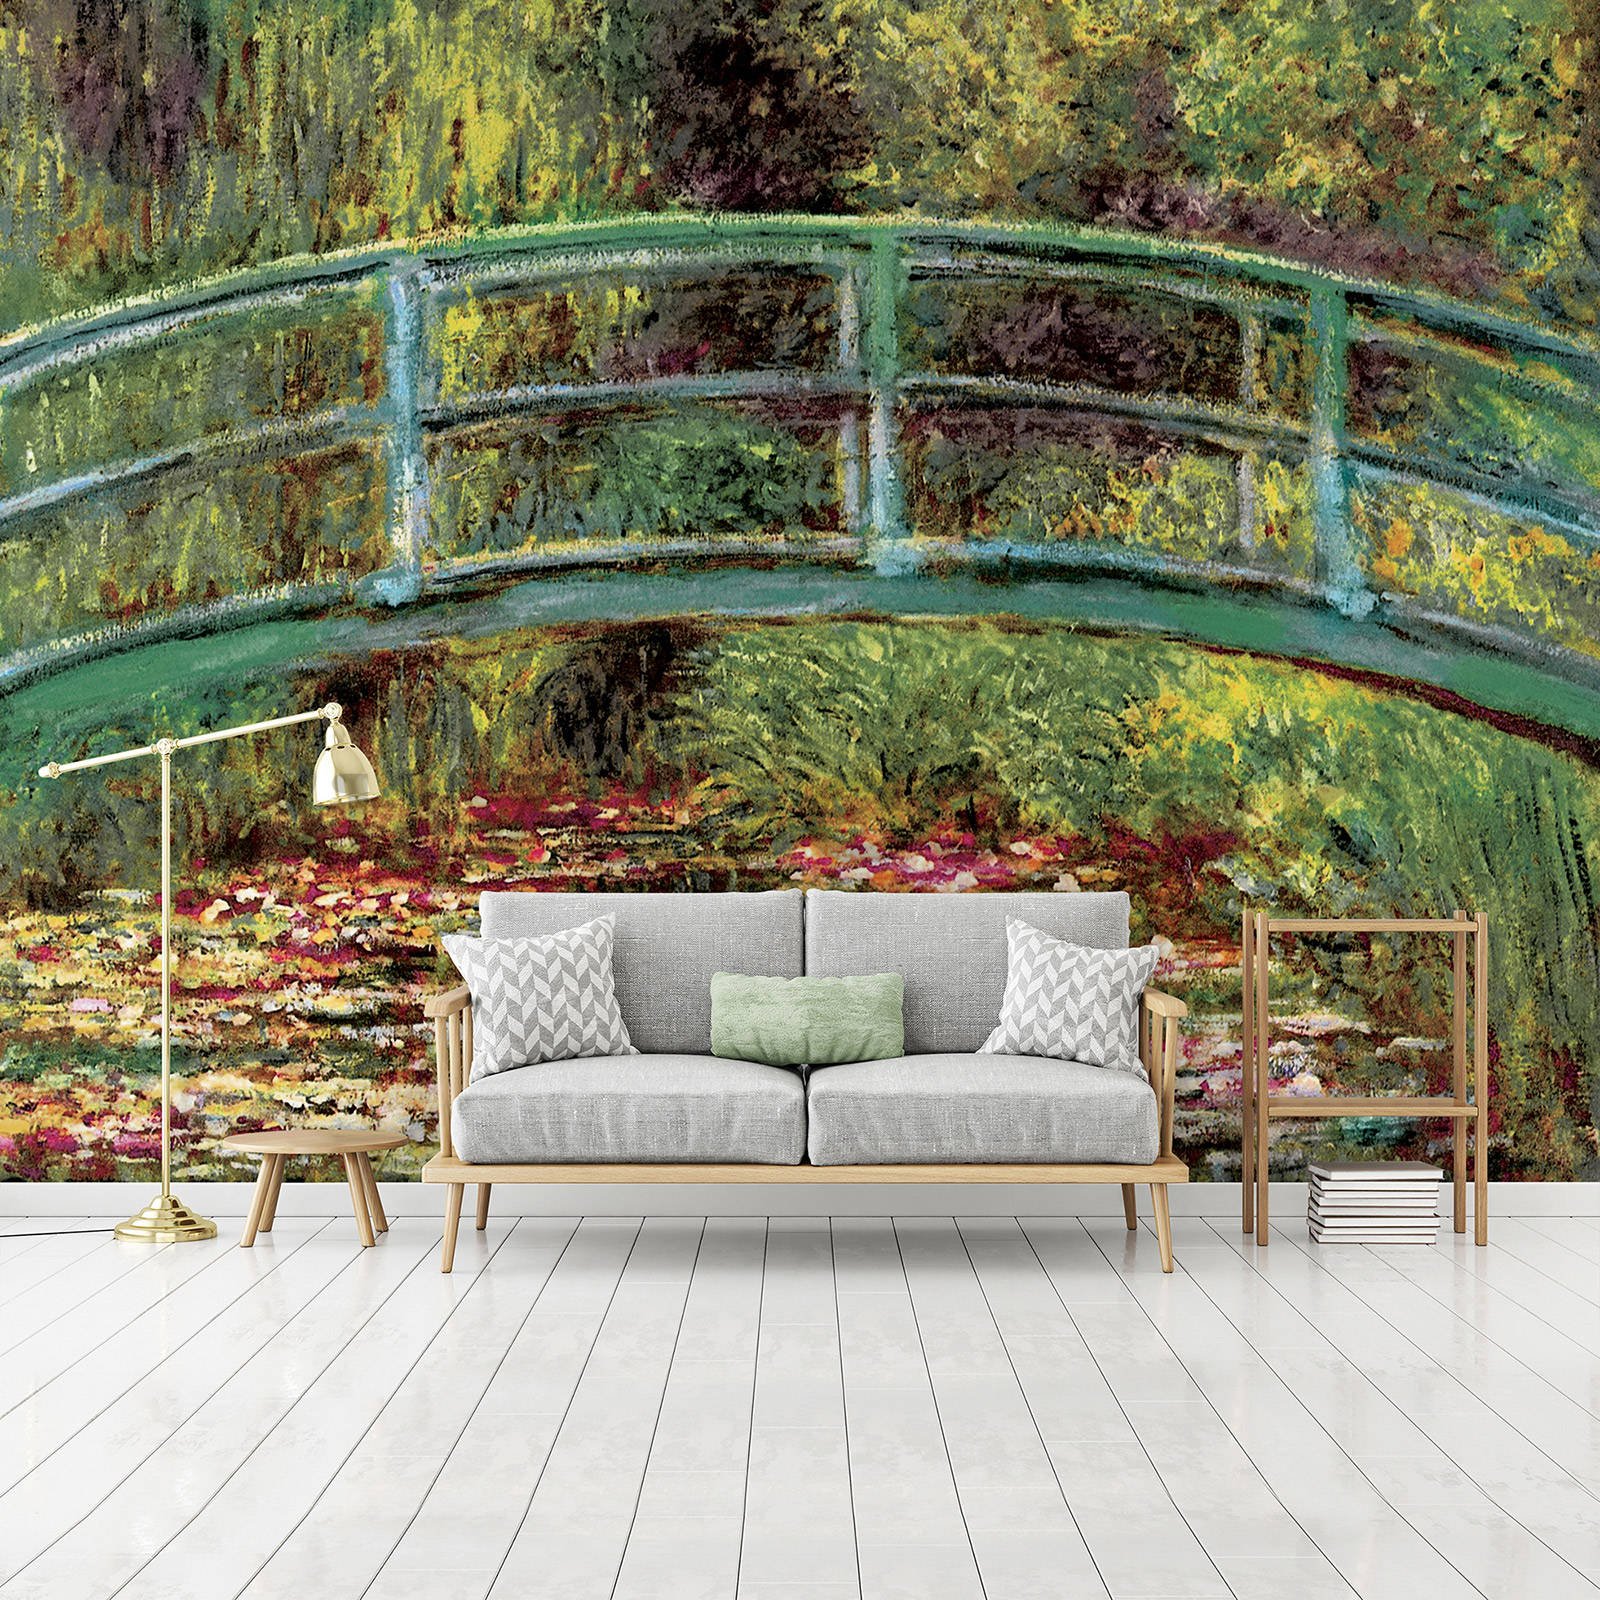 Vlies wall mural: Claude Monet, Pond with water lilies - 152,5x104 cm